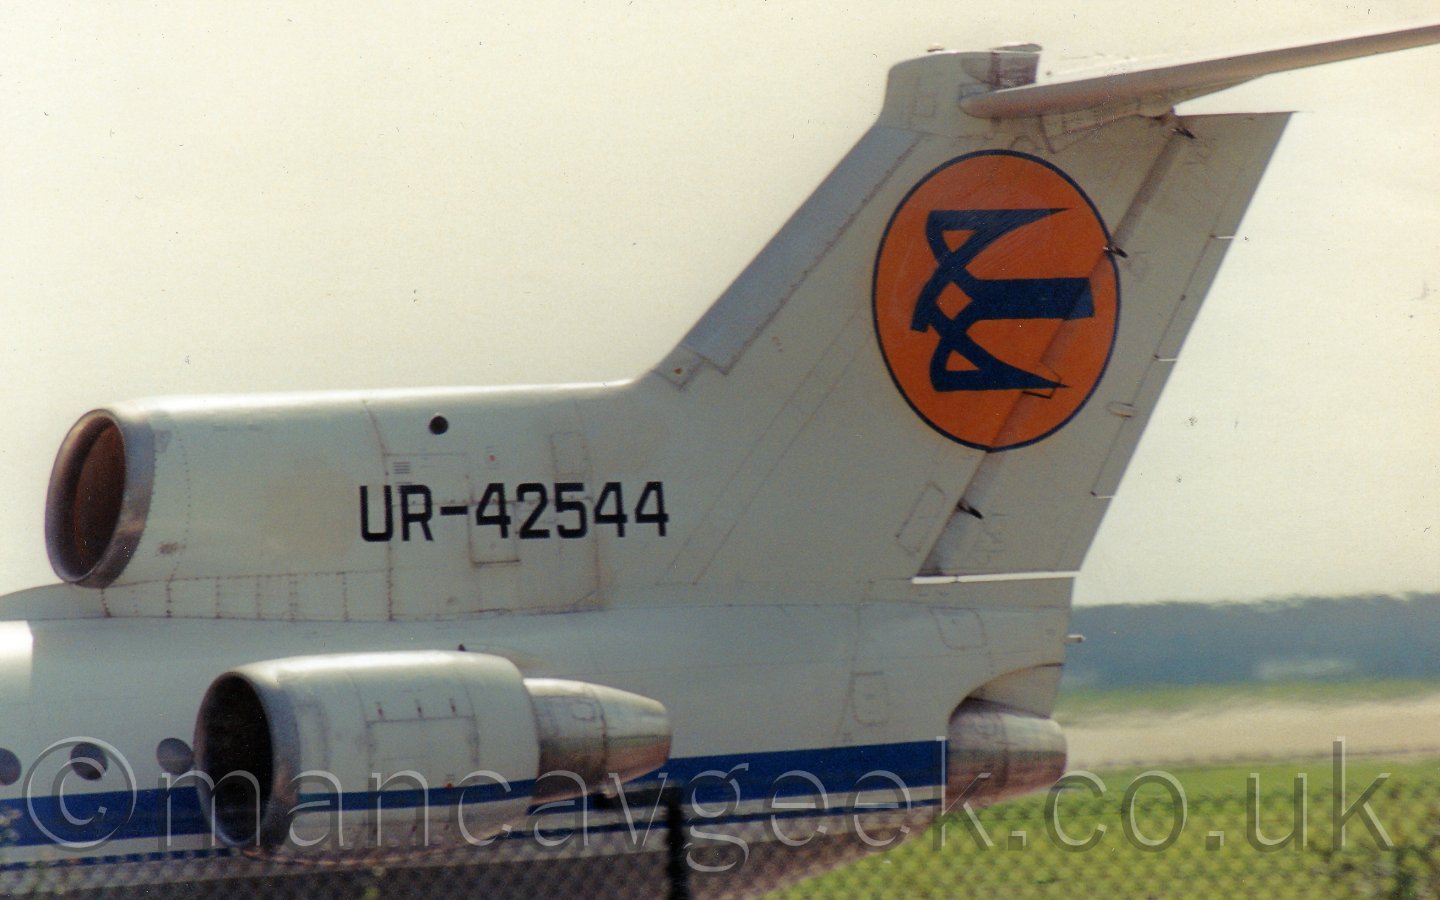 Close up of the tail of a white, 3 engined jet airliner taxing from right to left, under a bright but hazy sky.